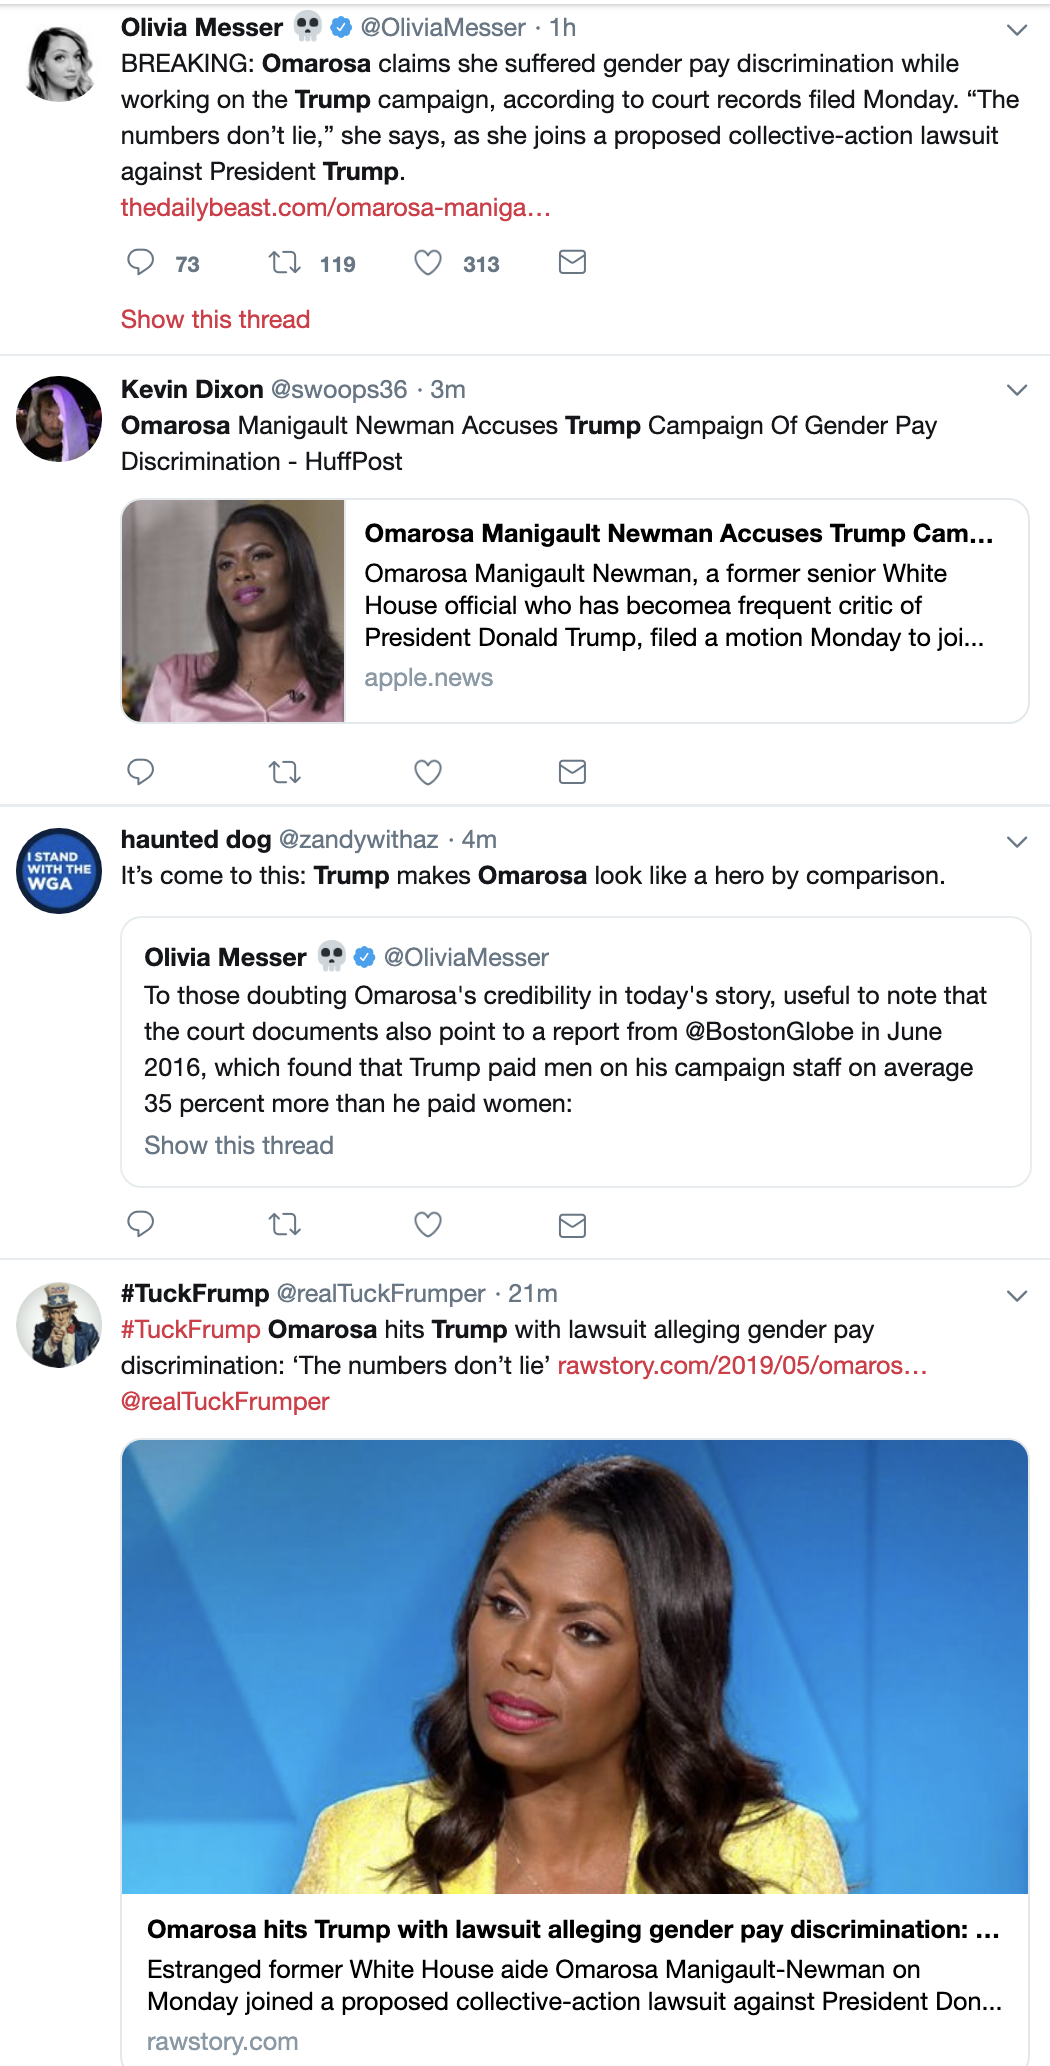 Screen-Shot-2019-05-13-at-2.04.11-PM Trump Administration Hit With Discrimination Lawsuit From Ex-Staffer Corruption Crime Donald Trump Economy Feminism Labor Politics Racism Sexism Top Stories Women's Rights 